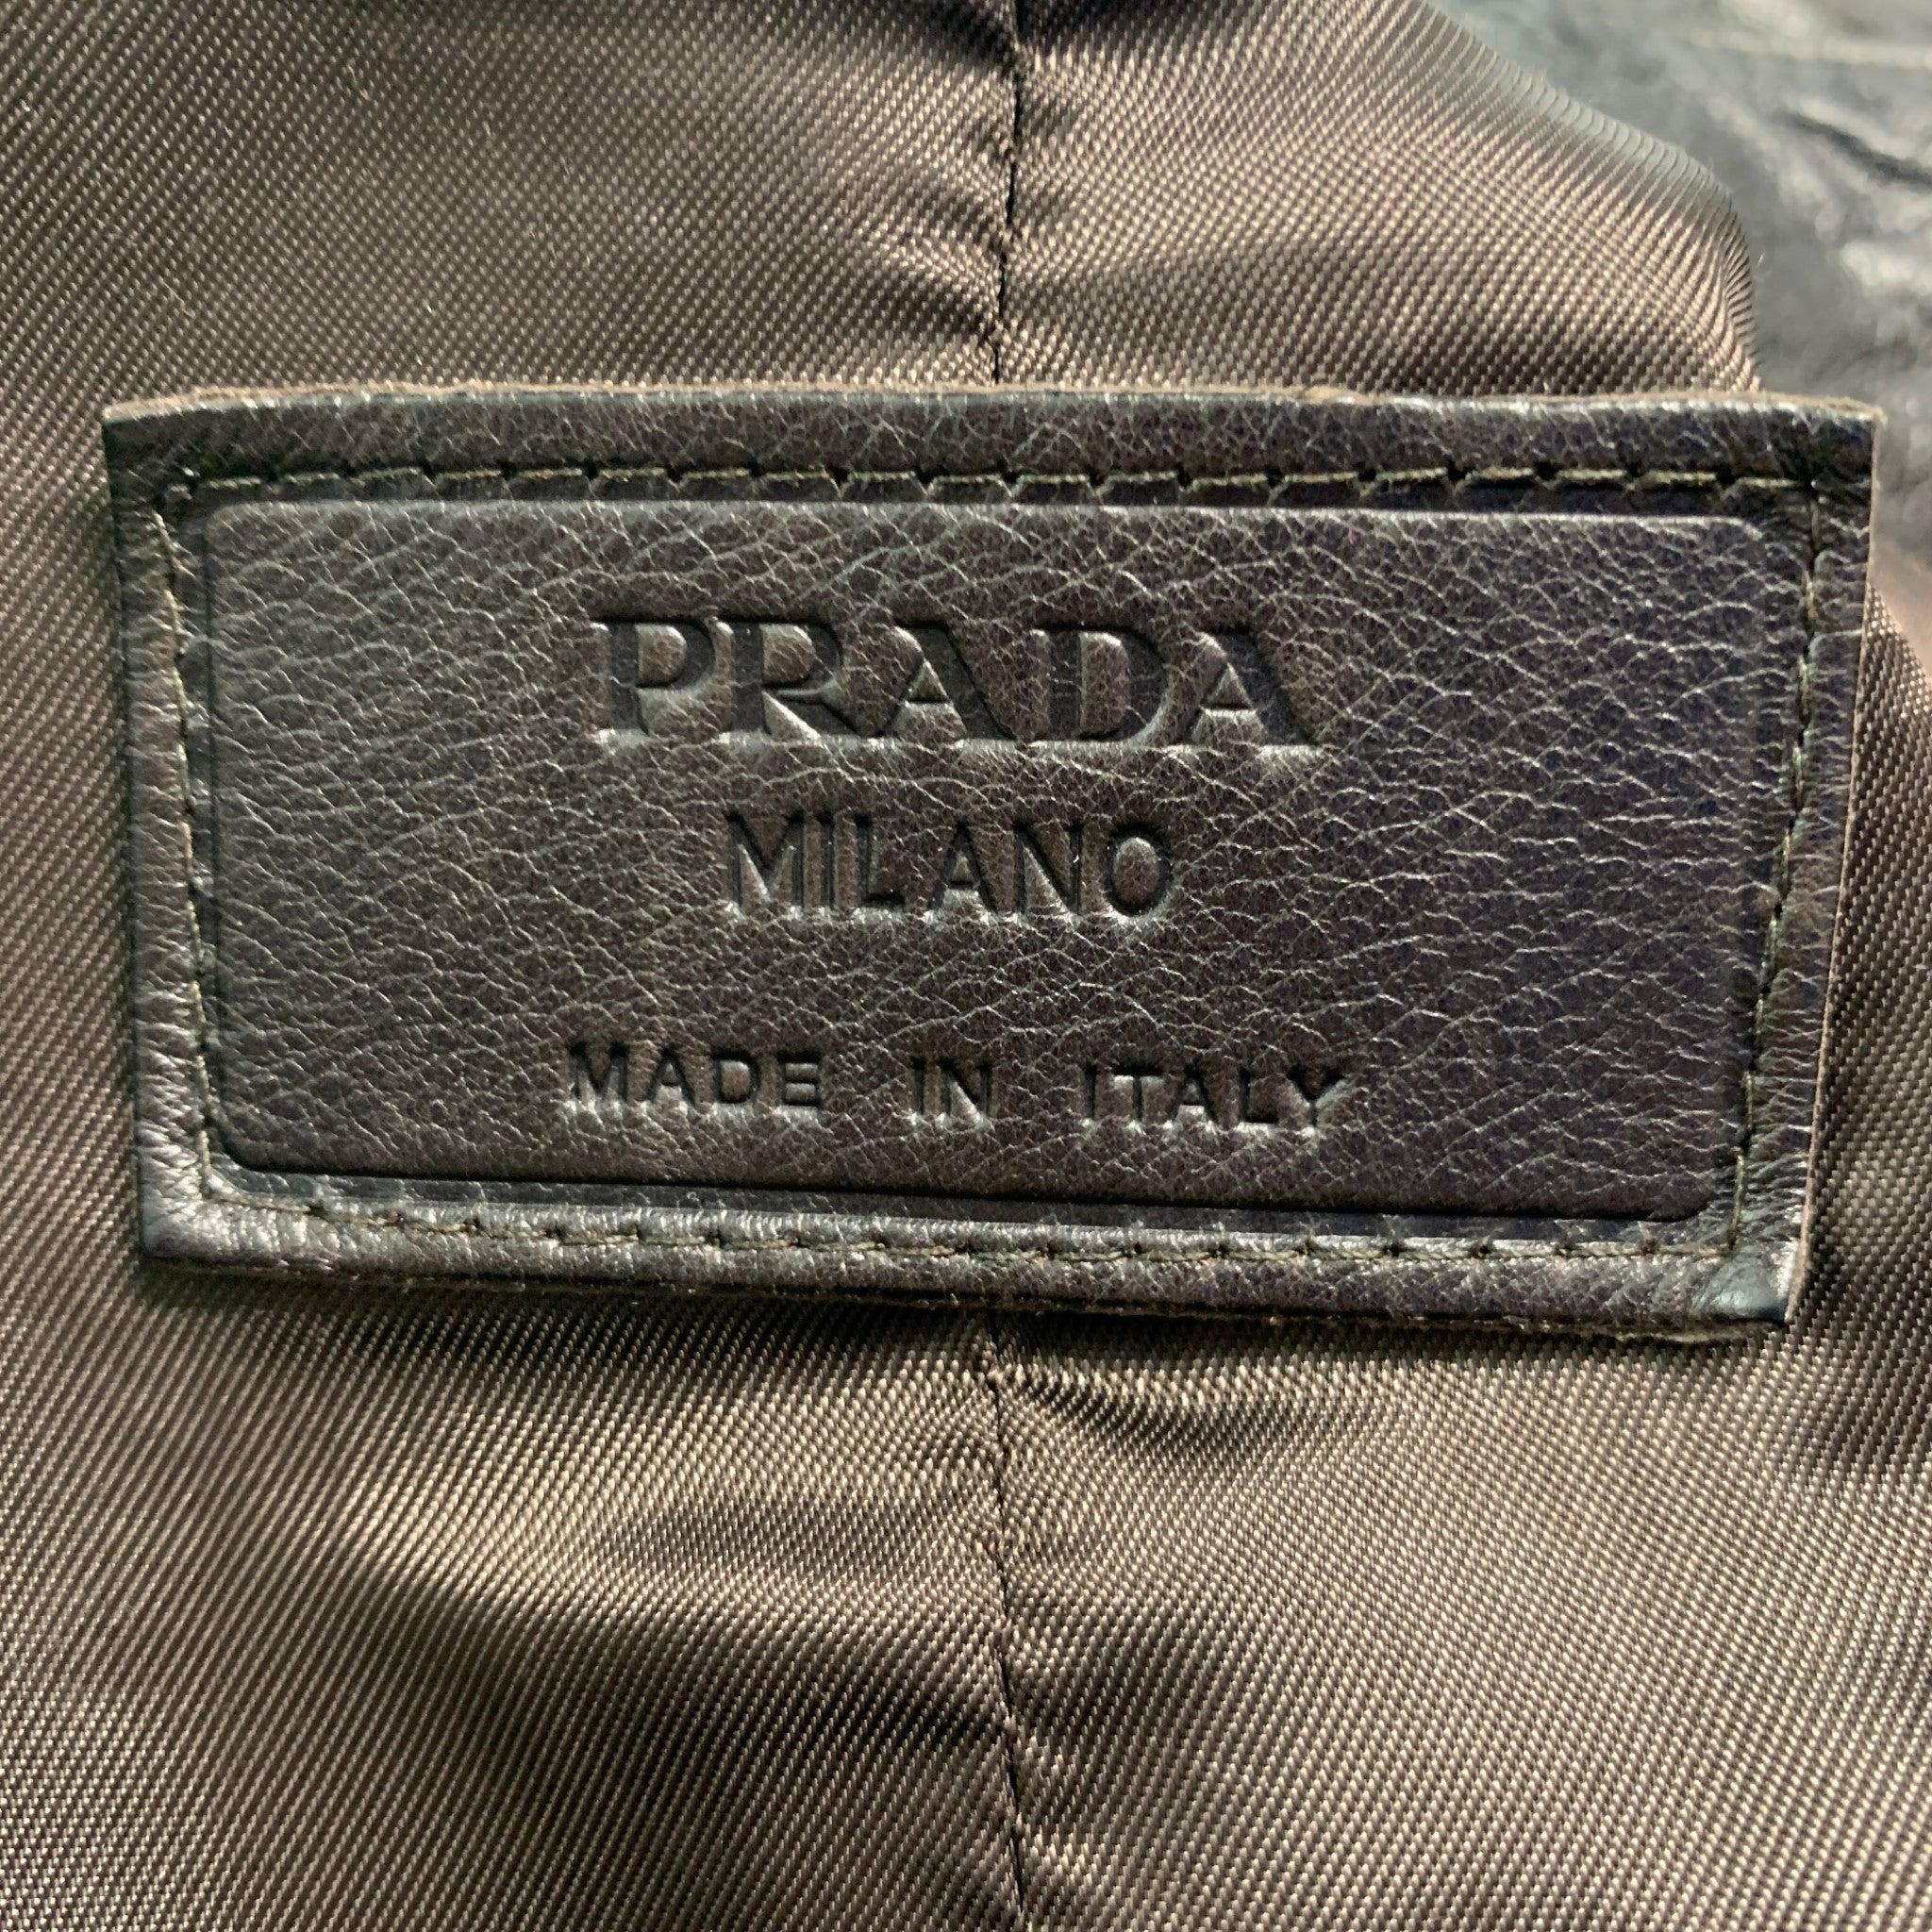 Men's PRADA Size 38 Brown Solid Leather Zip & Snaps Jacket For Sale